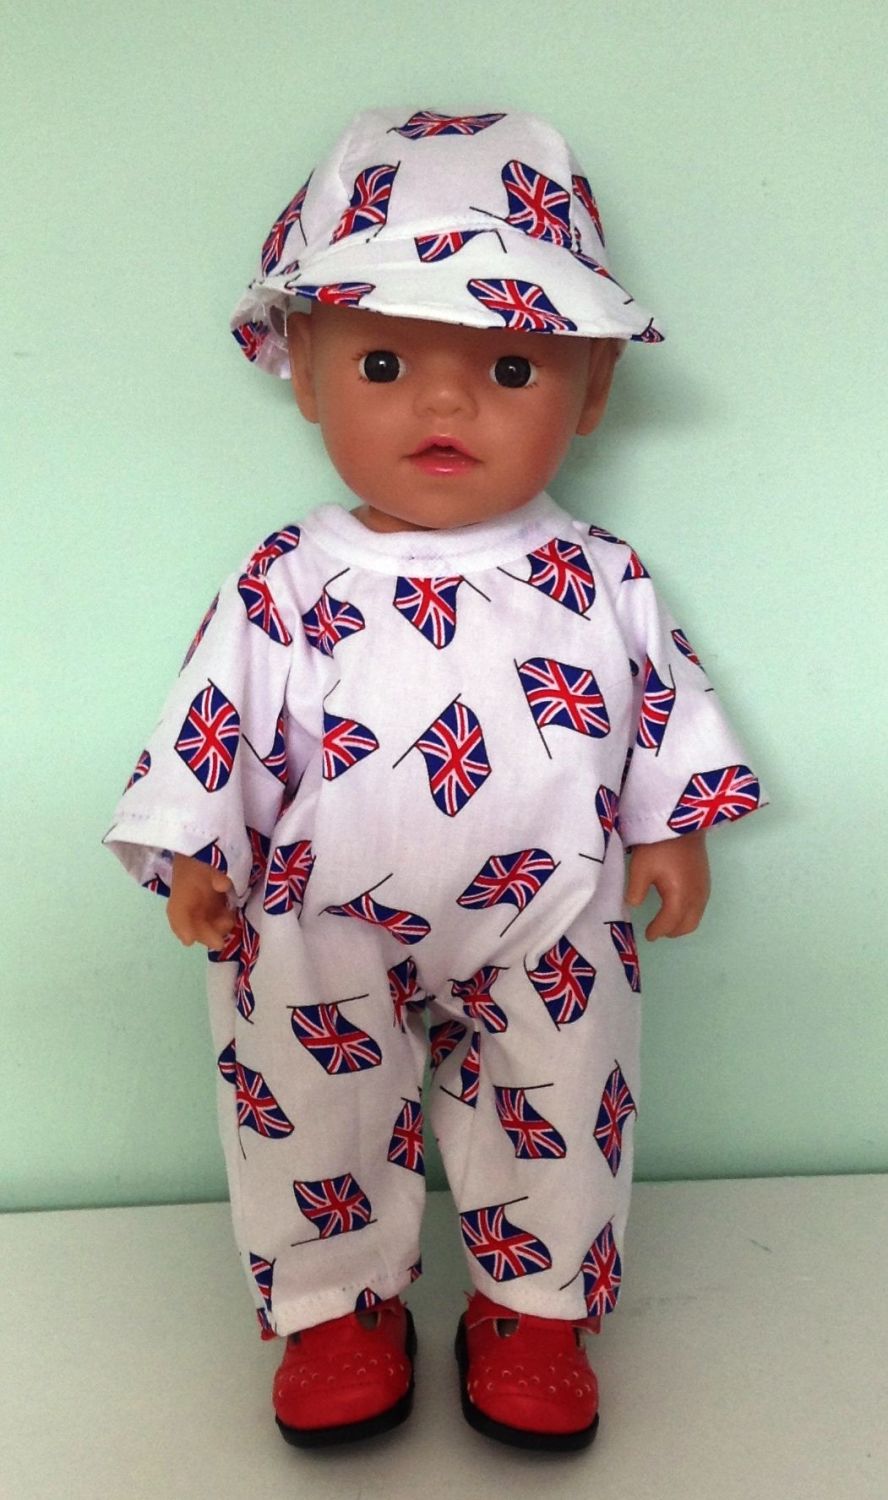 Doll's all in one/overall made to fit a 12 inch high baby doll